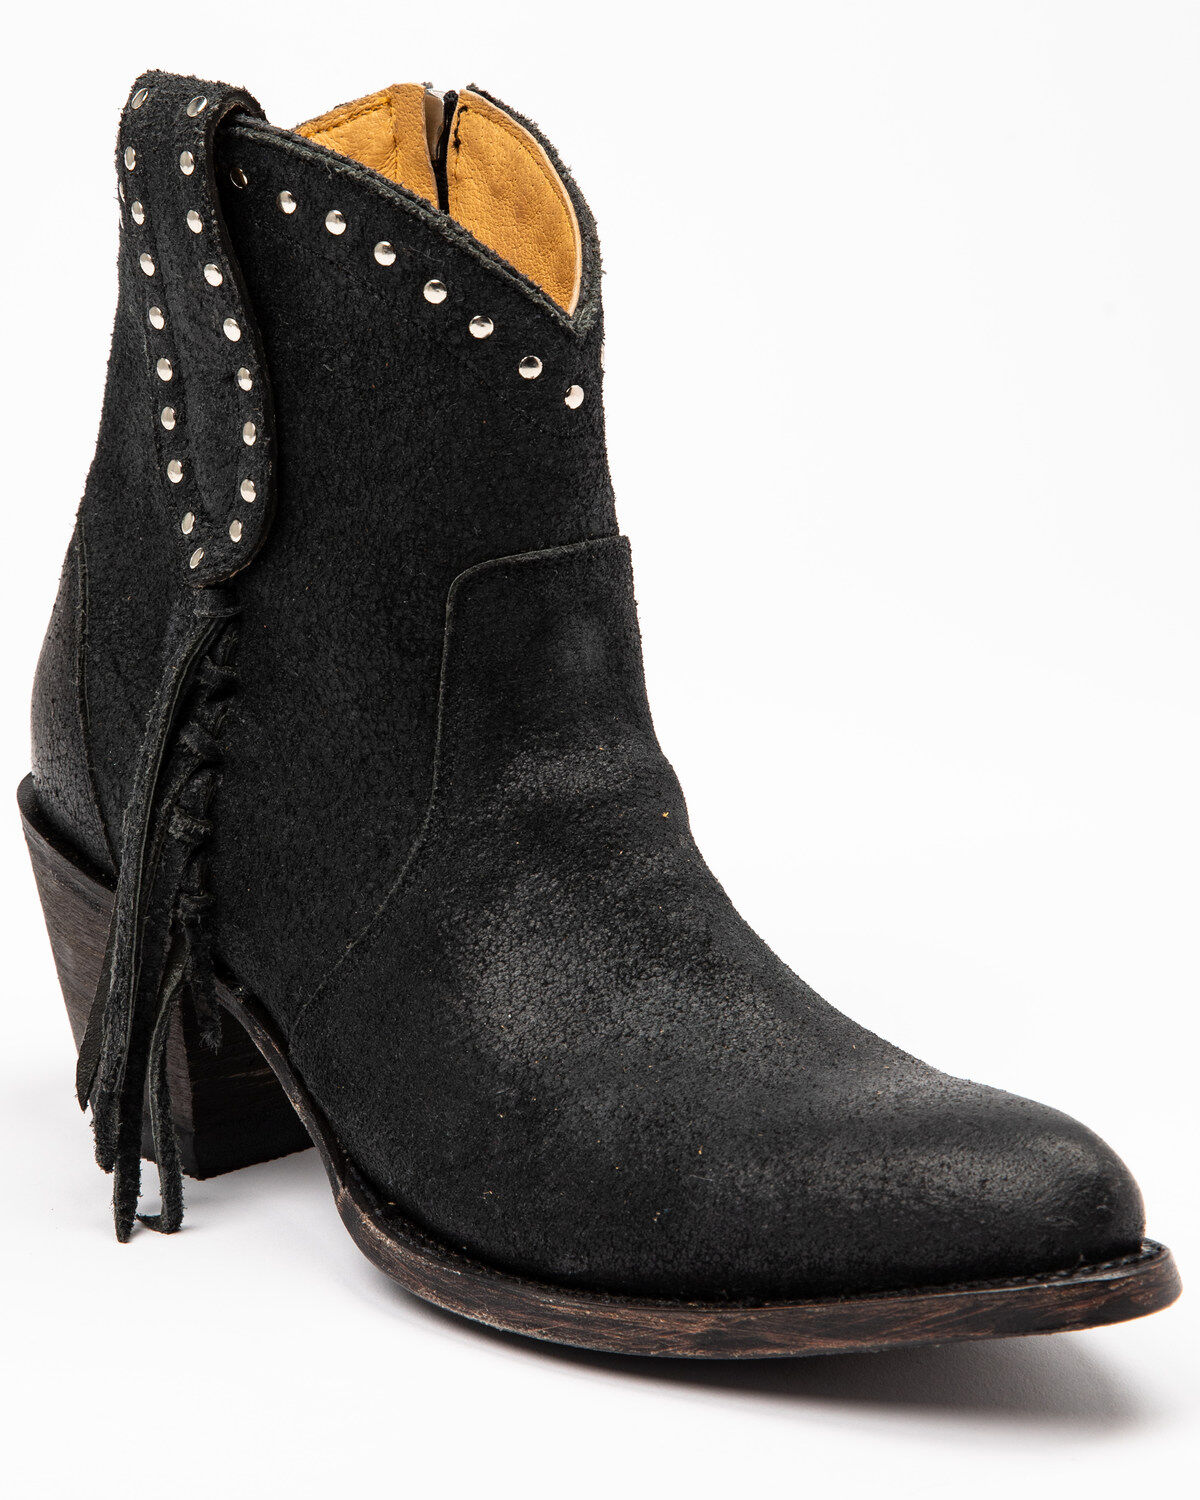 women's suede fringed boots